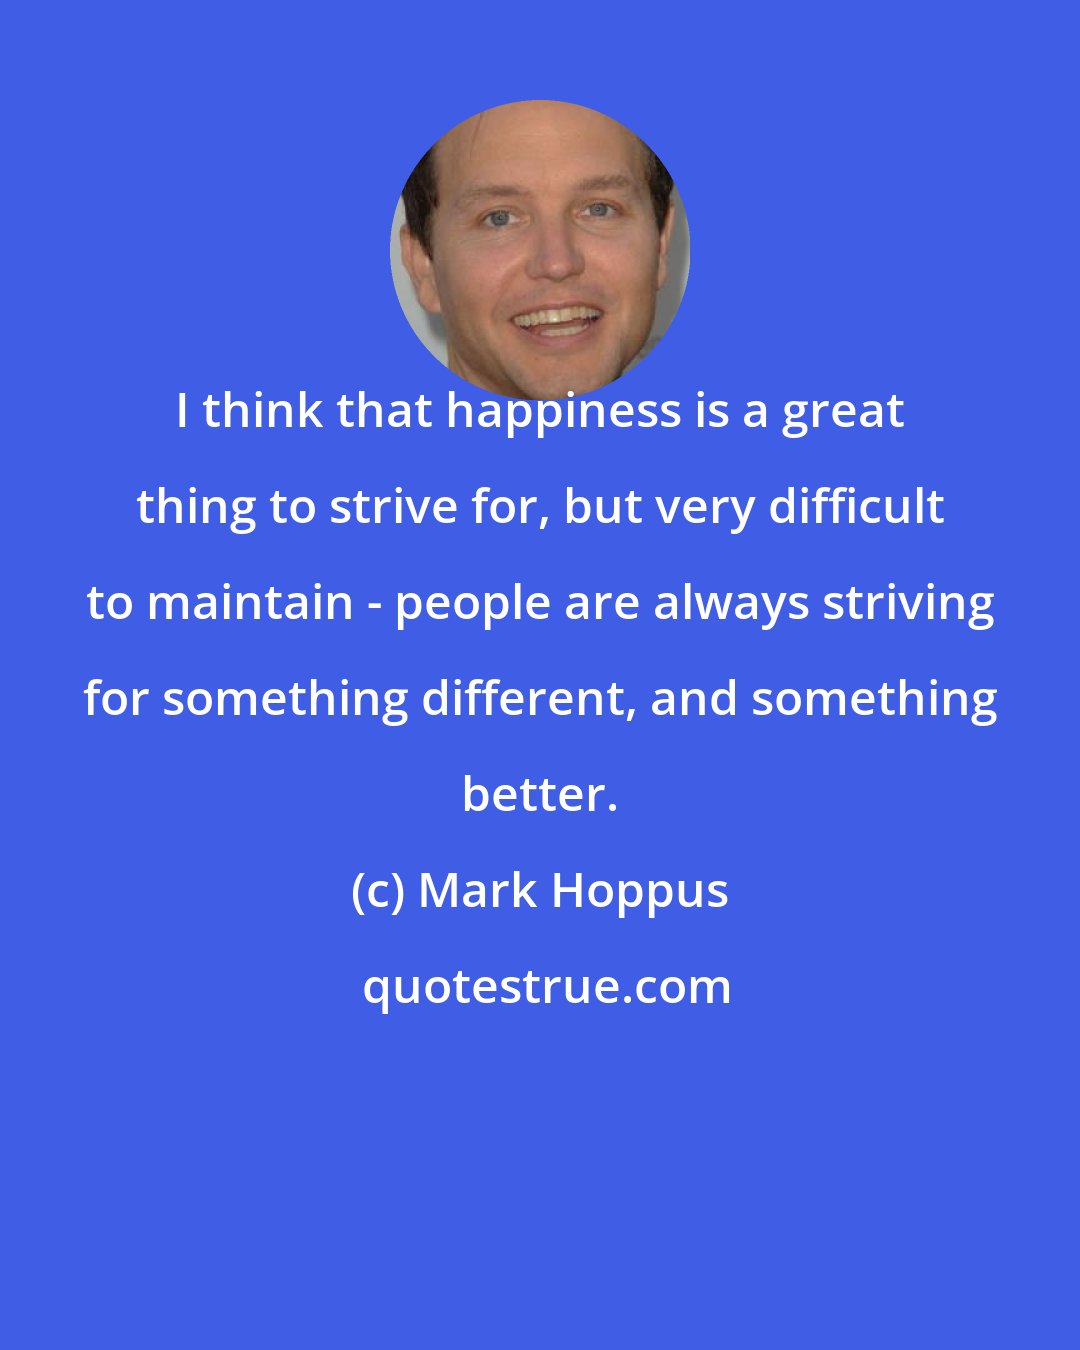 Mark Hoppus: I think that happiness is a great thing to strive for, but very difficult to maintain - people are always striving for something different, and something better.